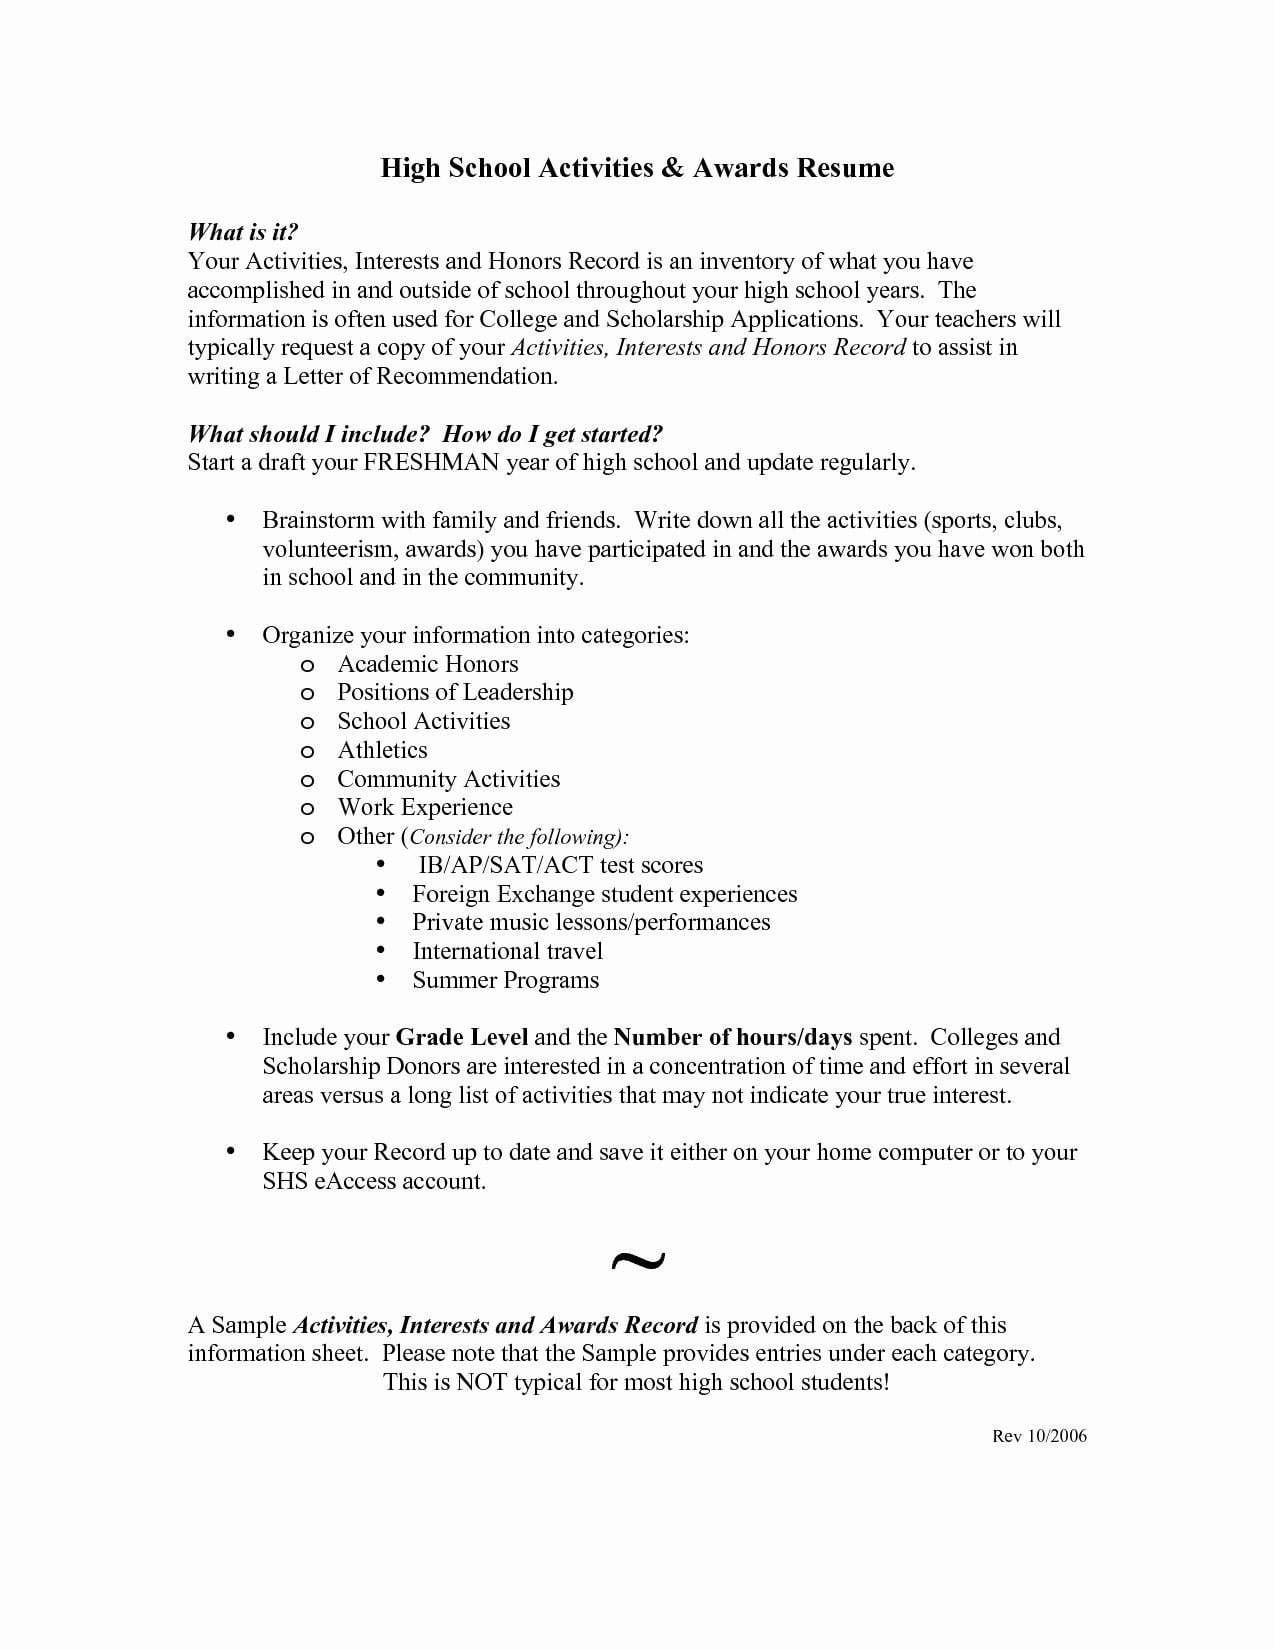 College Research Worksheet For High School Students Math Worksheets With Regard To College Research Worksheet For High School Students